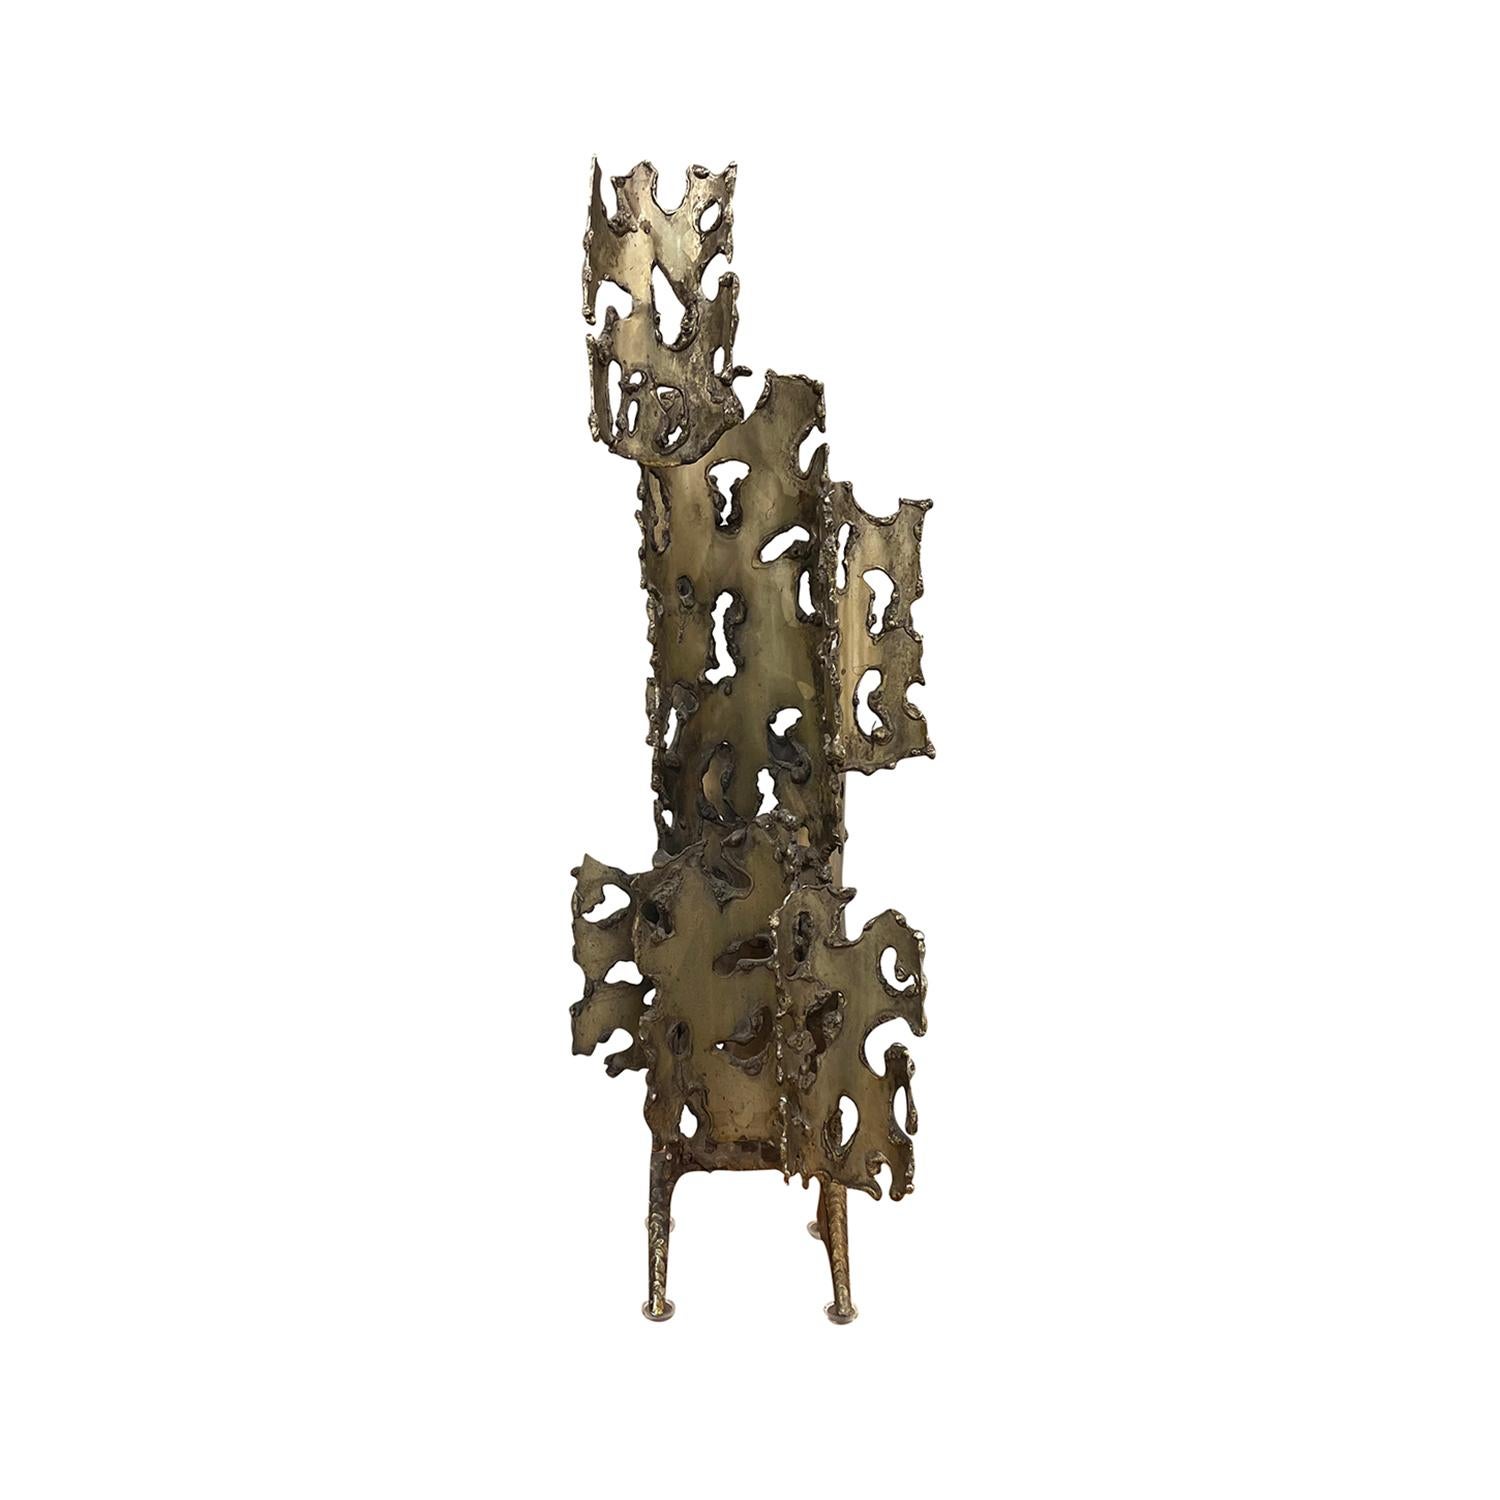 An abstract, vintage Mid-Century modern sculpture made of hand crafted cut steel, in good condition. The detailed Brutalist décor piece is enhanced by many different metal pieces, supported by a triangular base. Wear consistent with age and use.